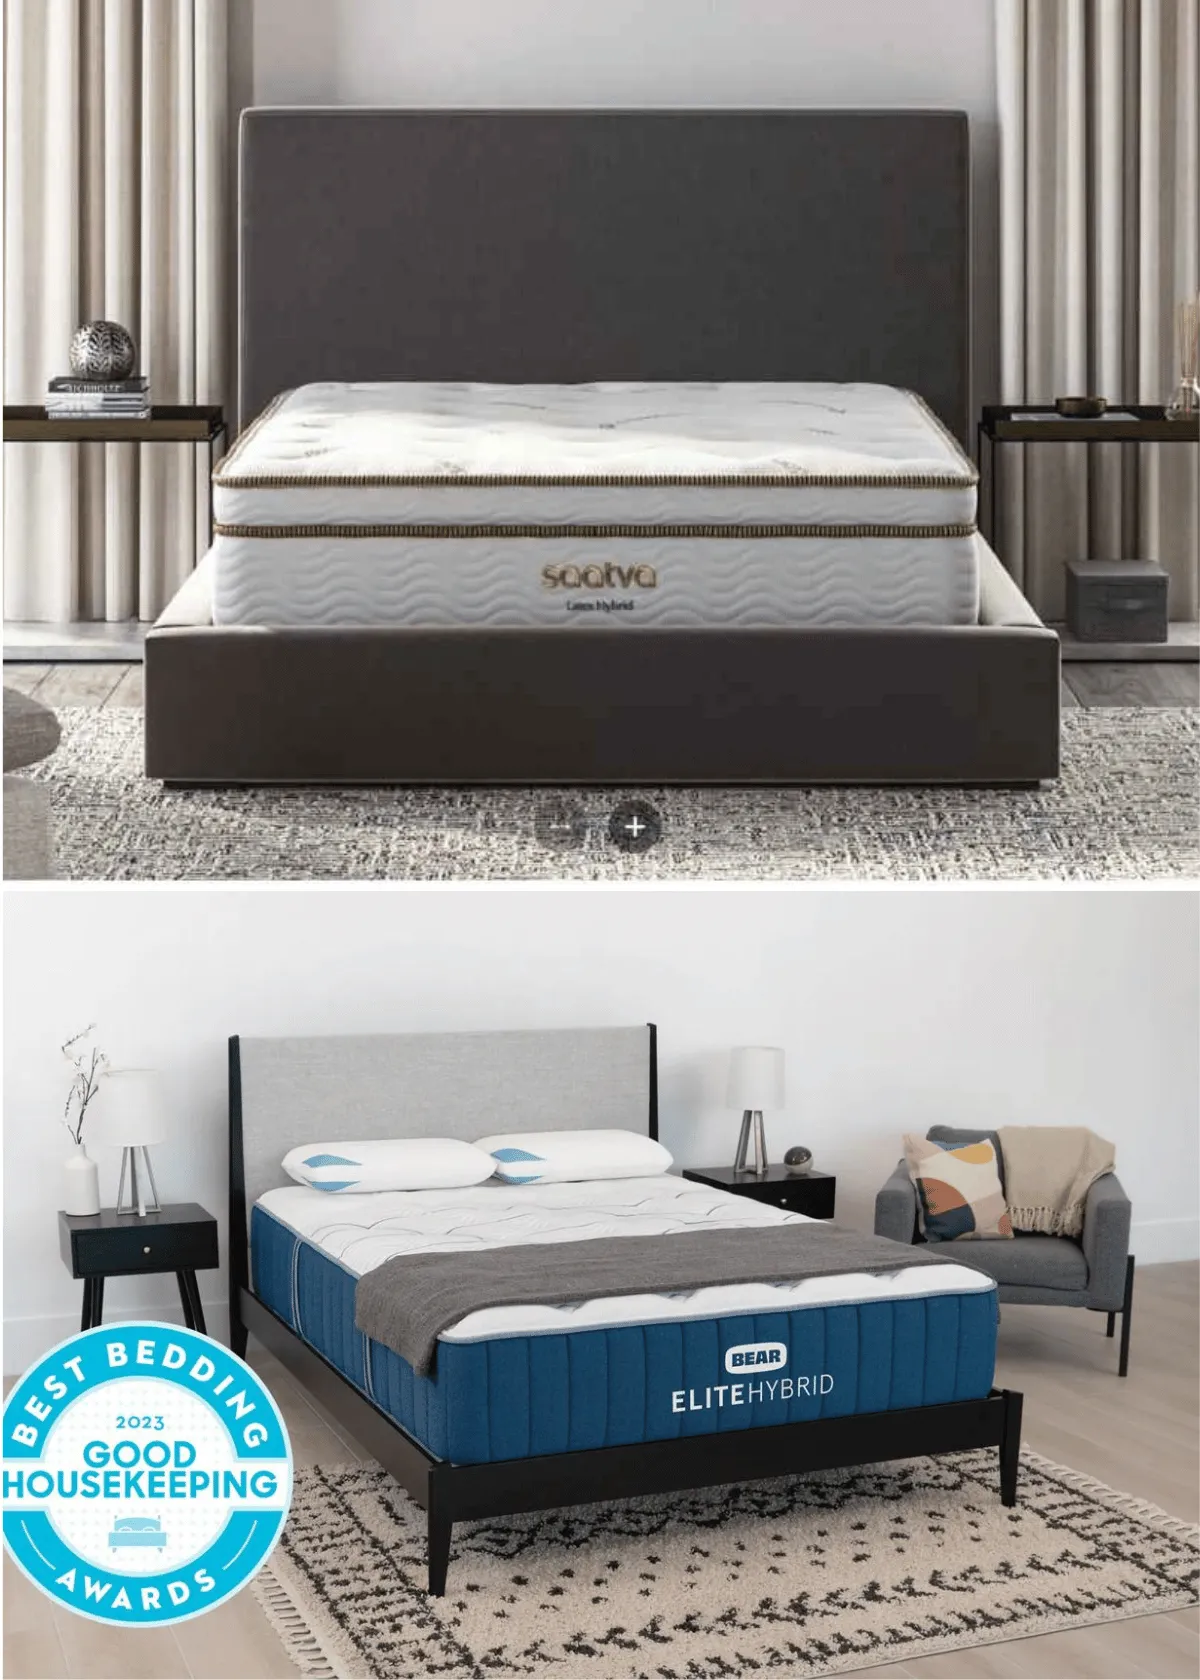 "Mattress Brands and Manufacturers: The Ultimate Guide- Top 15"